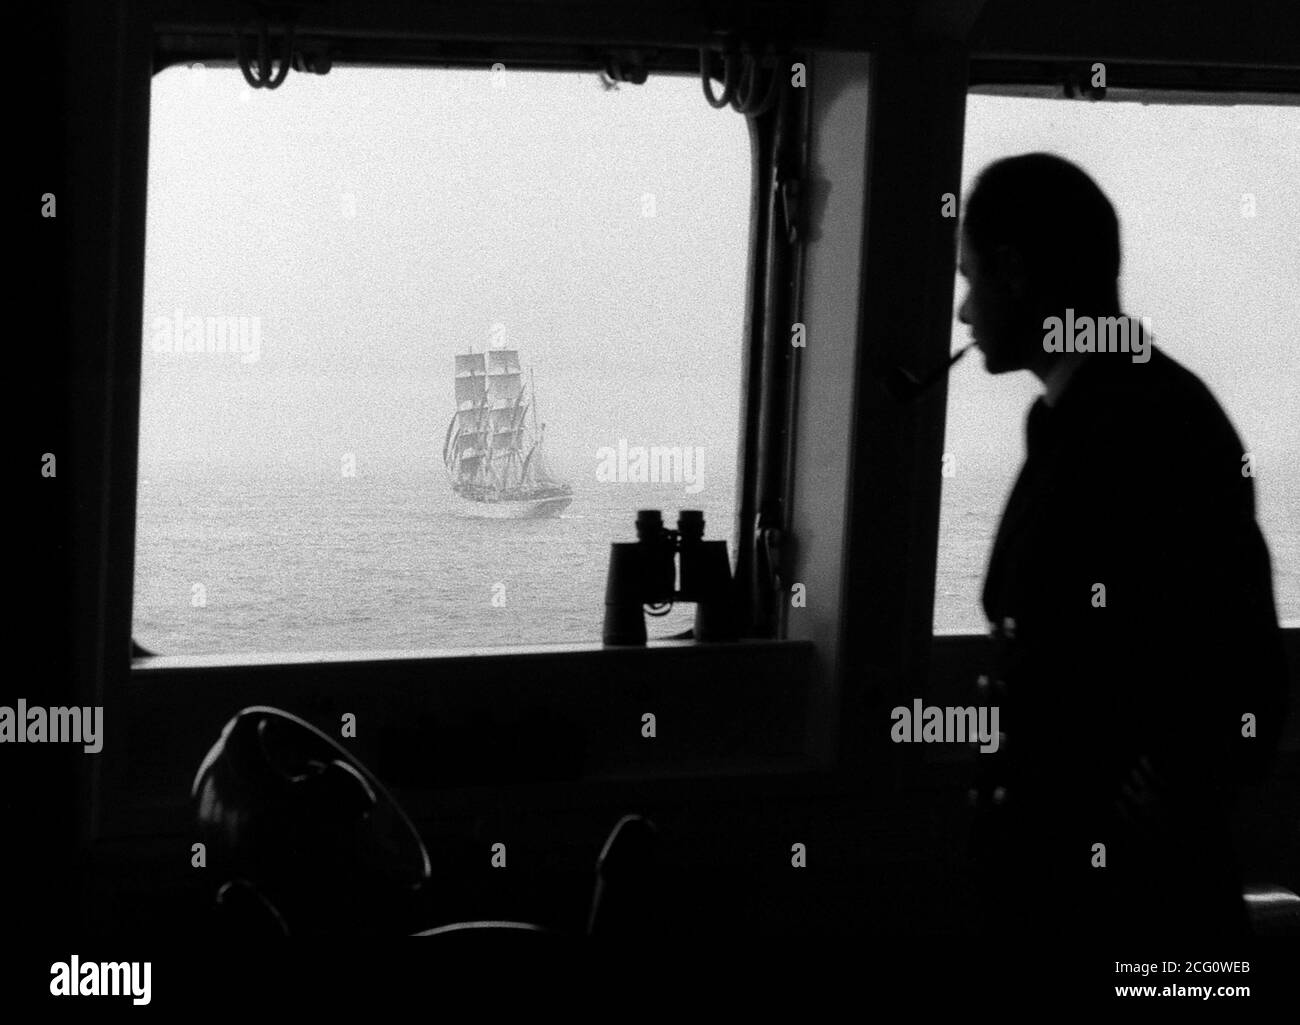 AJAXNETPHOTO. 1966. AT SEA, ENGLISH CHANNEL. - KEEPING AN EYE ON IT - MASTER OF THE SUPER TANKER GULF BRITON KEEPS A CLOSE EYE ON THE SQUARE RIGGED SAILING SHIP STATSRAAD LEHMKUHL AS BOTH PROCEED WESTWARD.PHOTO:JONATHAN EASTLAND/AJAX REF:253627 109 Stock Photo